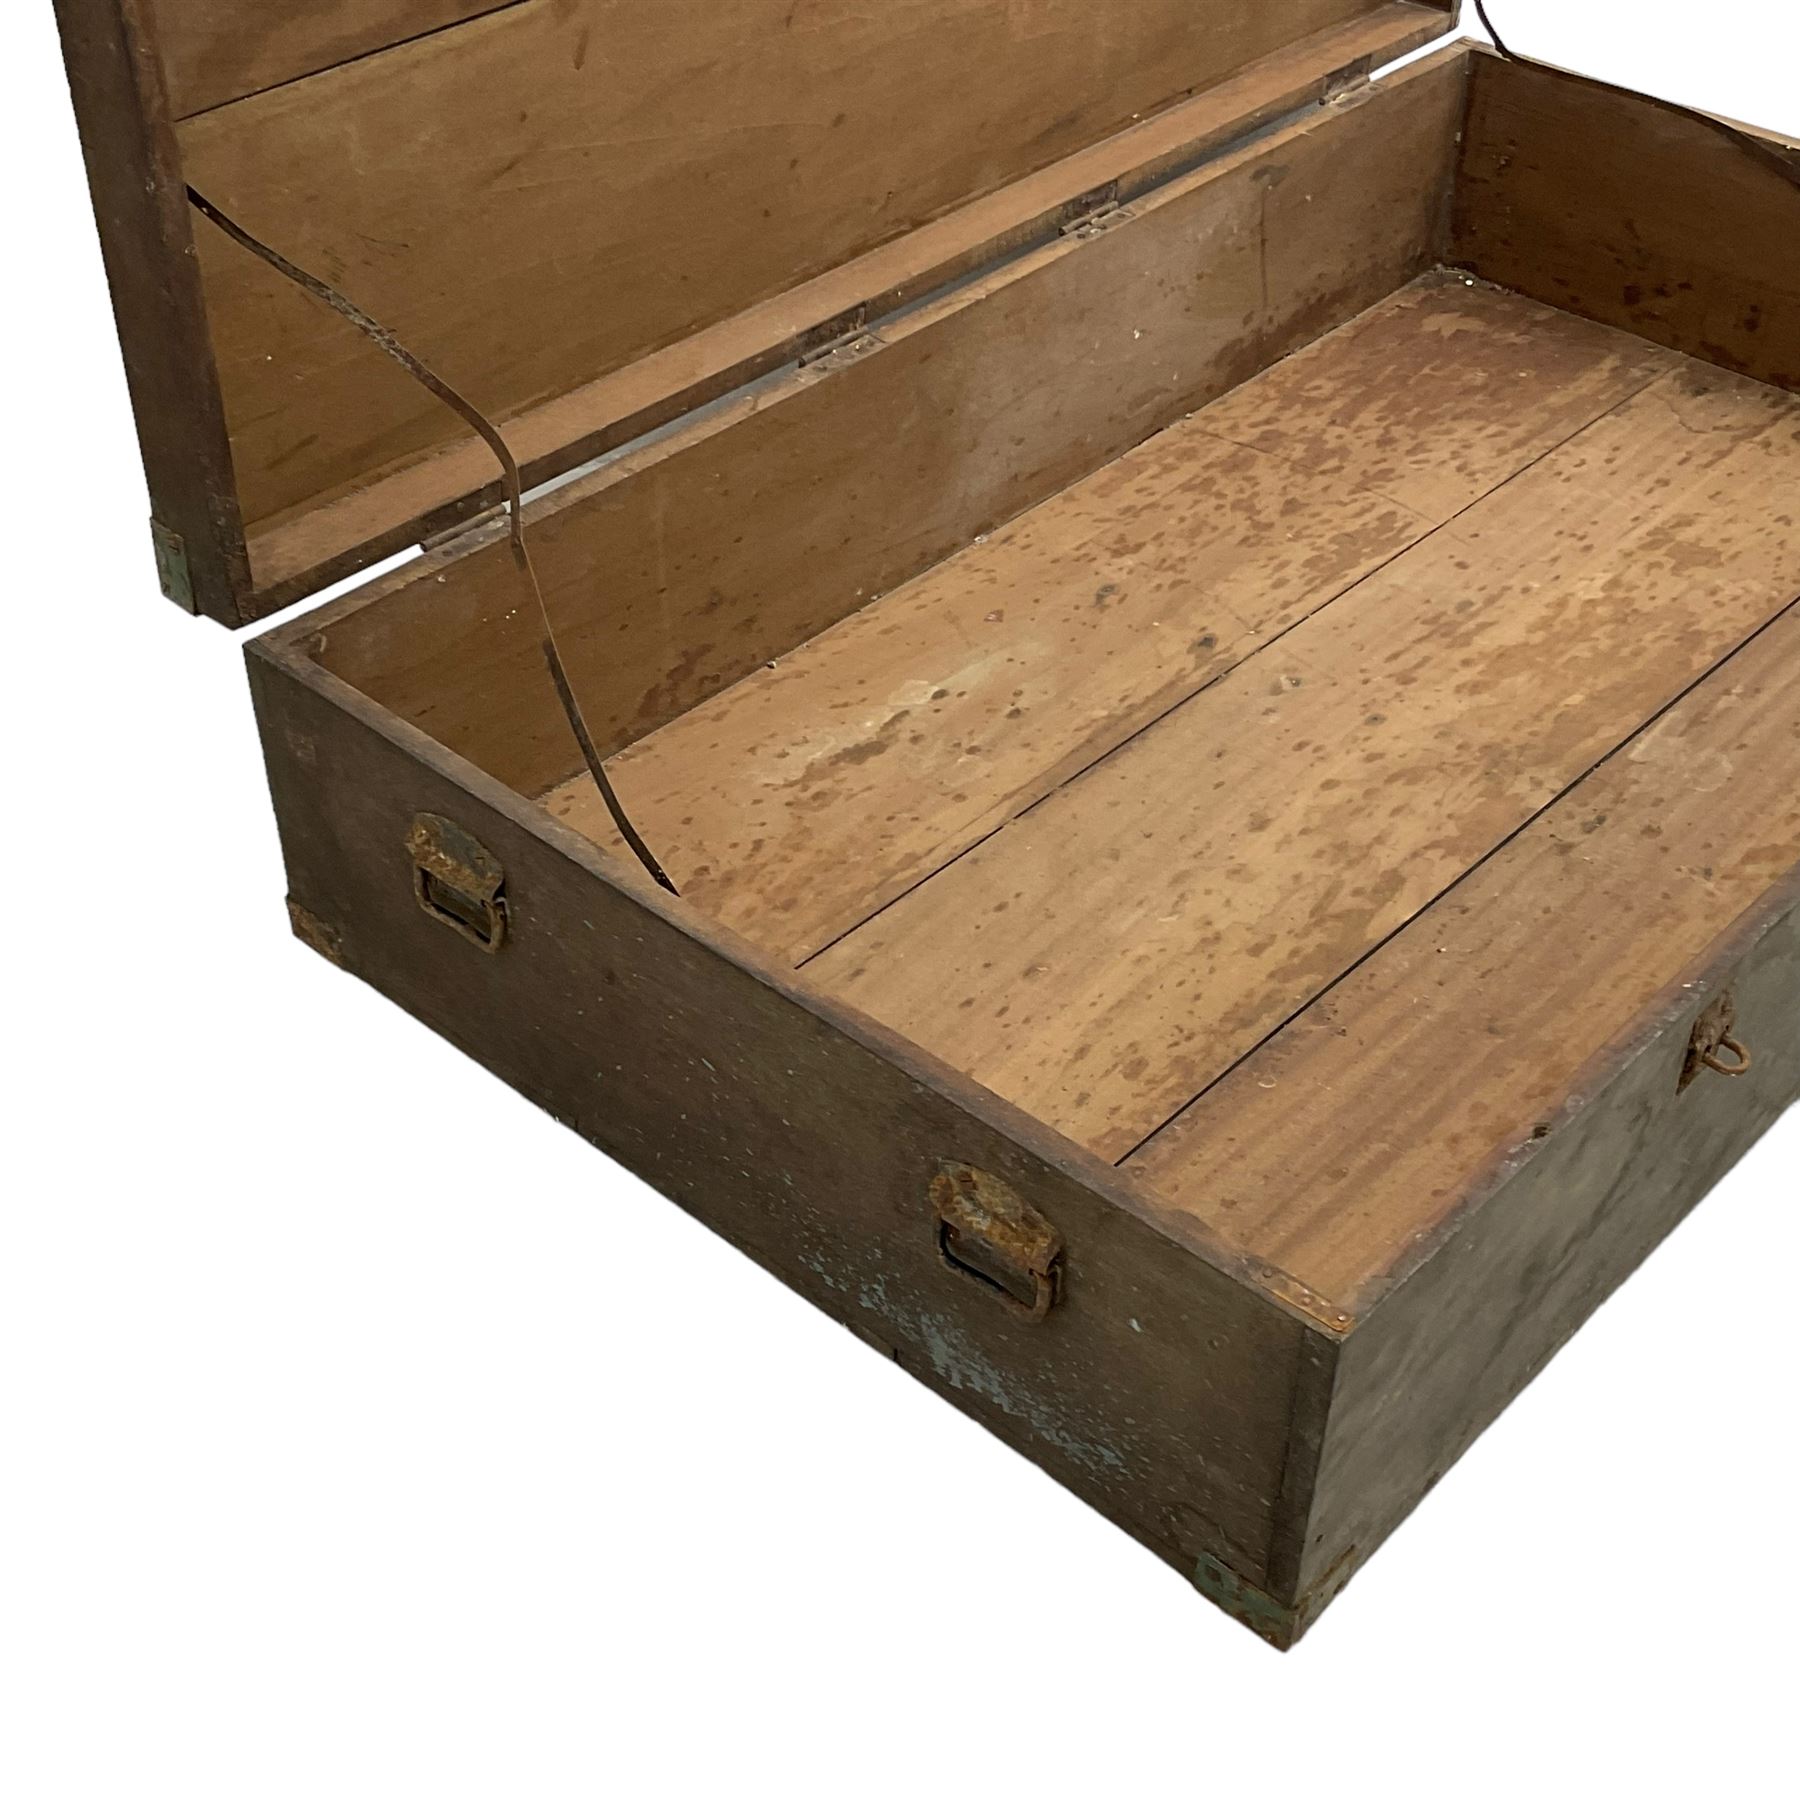 Large 19th century wooden touring trunk - Image 3 of 7